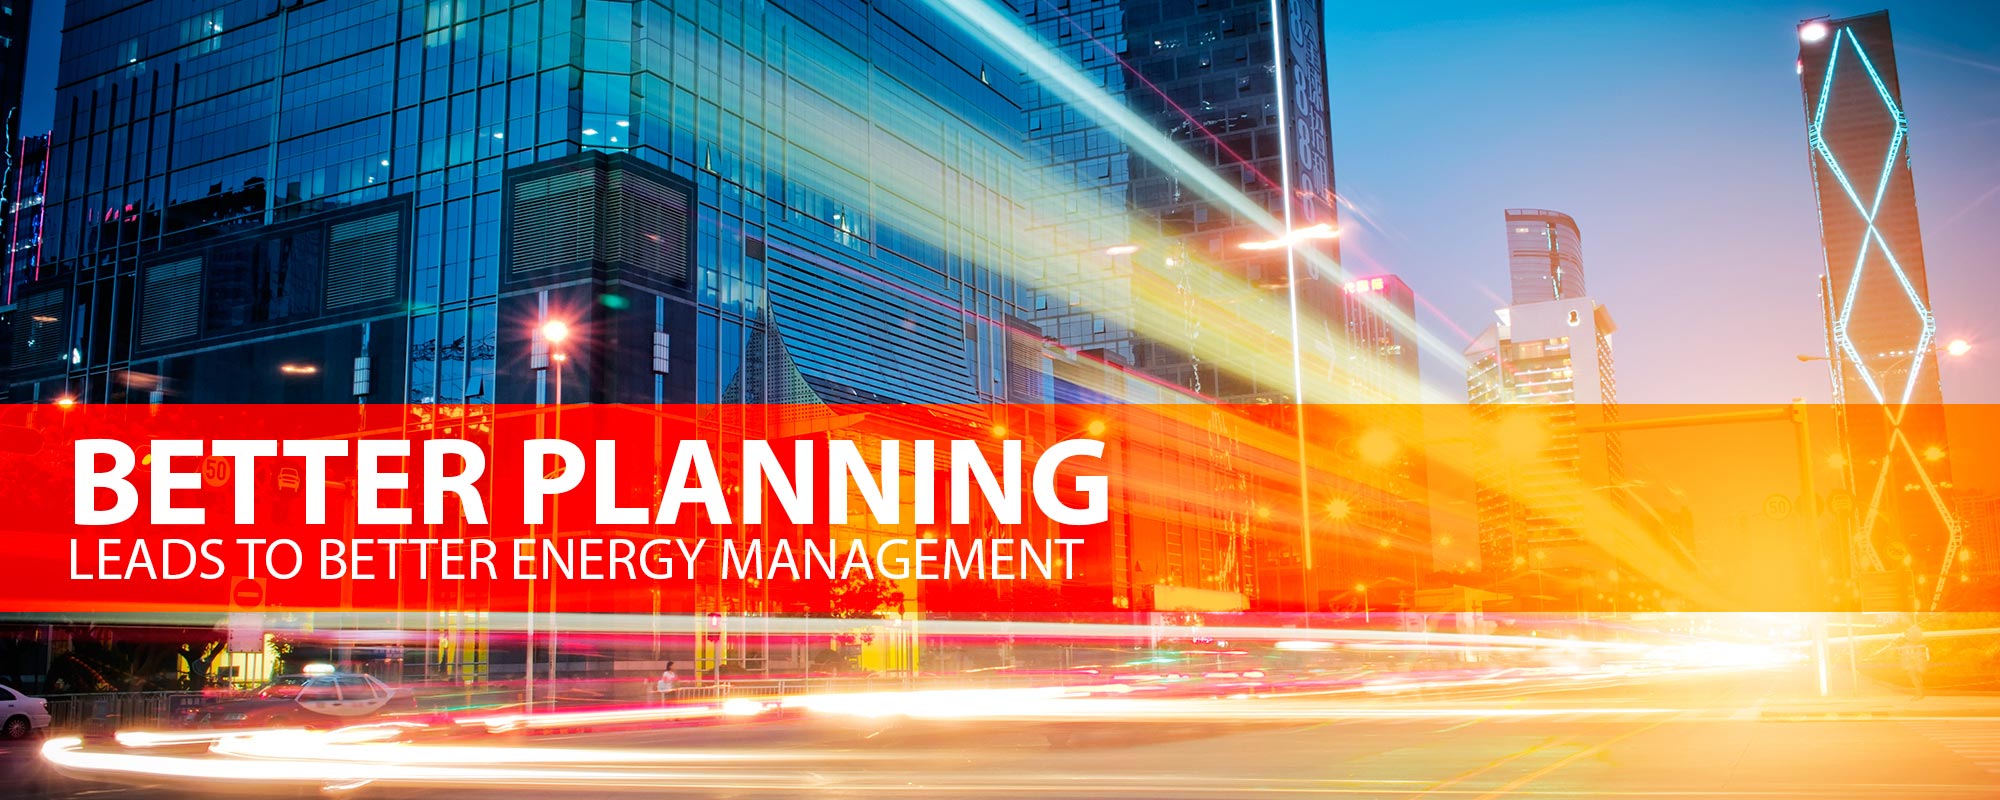 Better Planning - Leads to better energy management